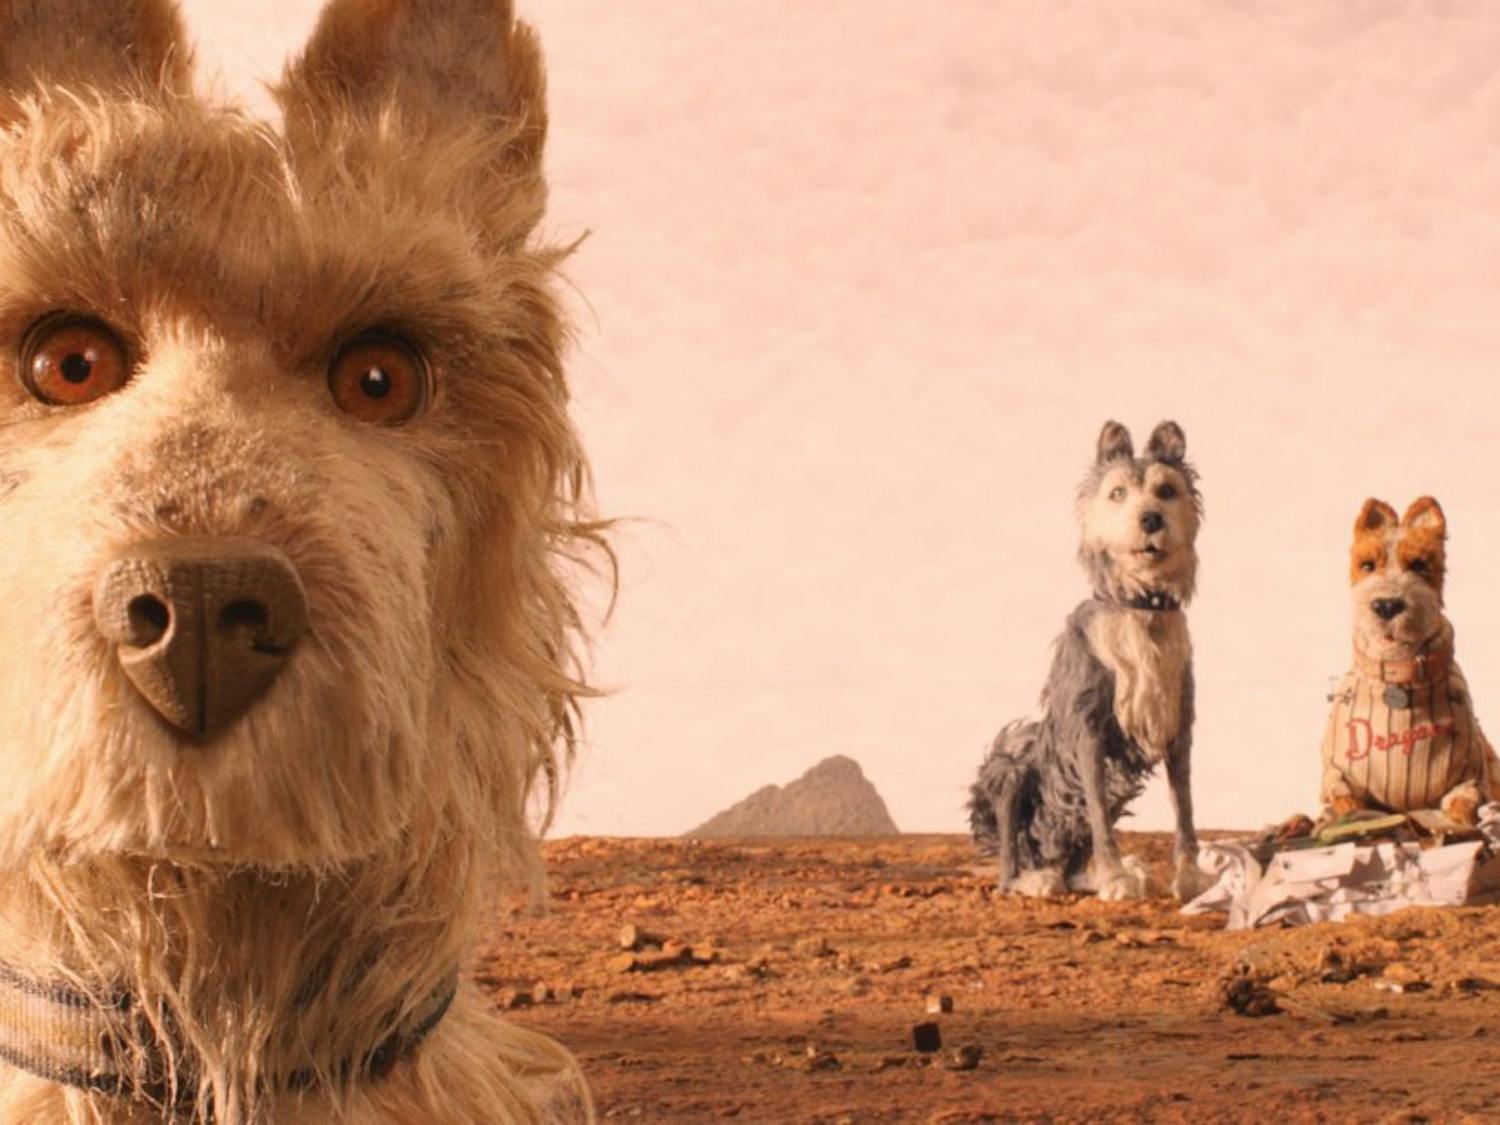 Wes Anderson's latest film, “Isle of Dogs,” takes place in a dystopian version of Japan, wherein all dogs are banished from the country.